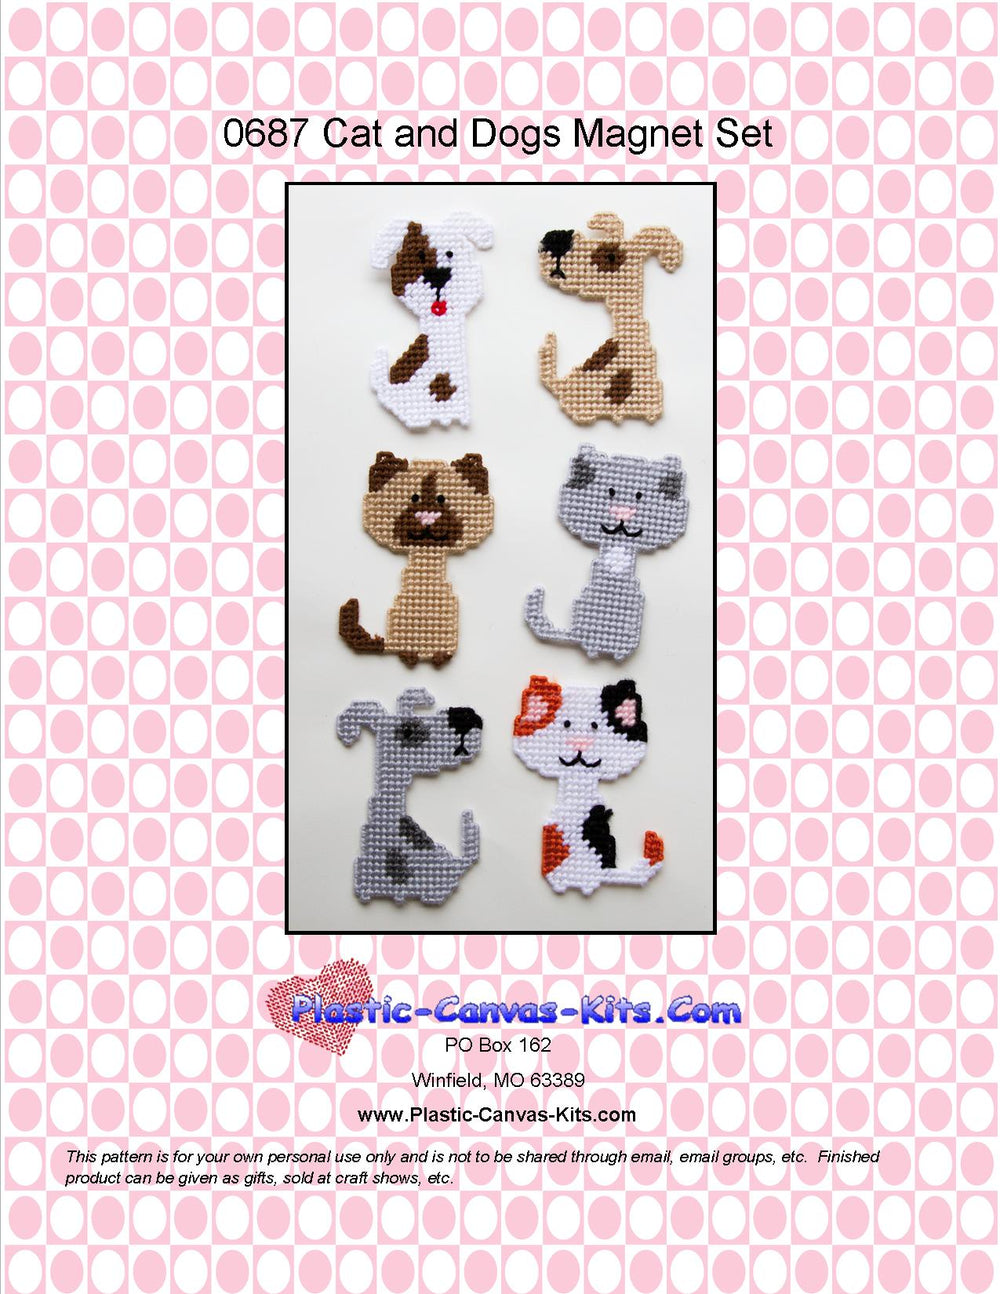 Cats and Dogs Magnet Set